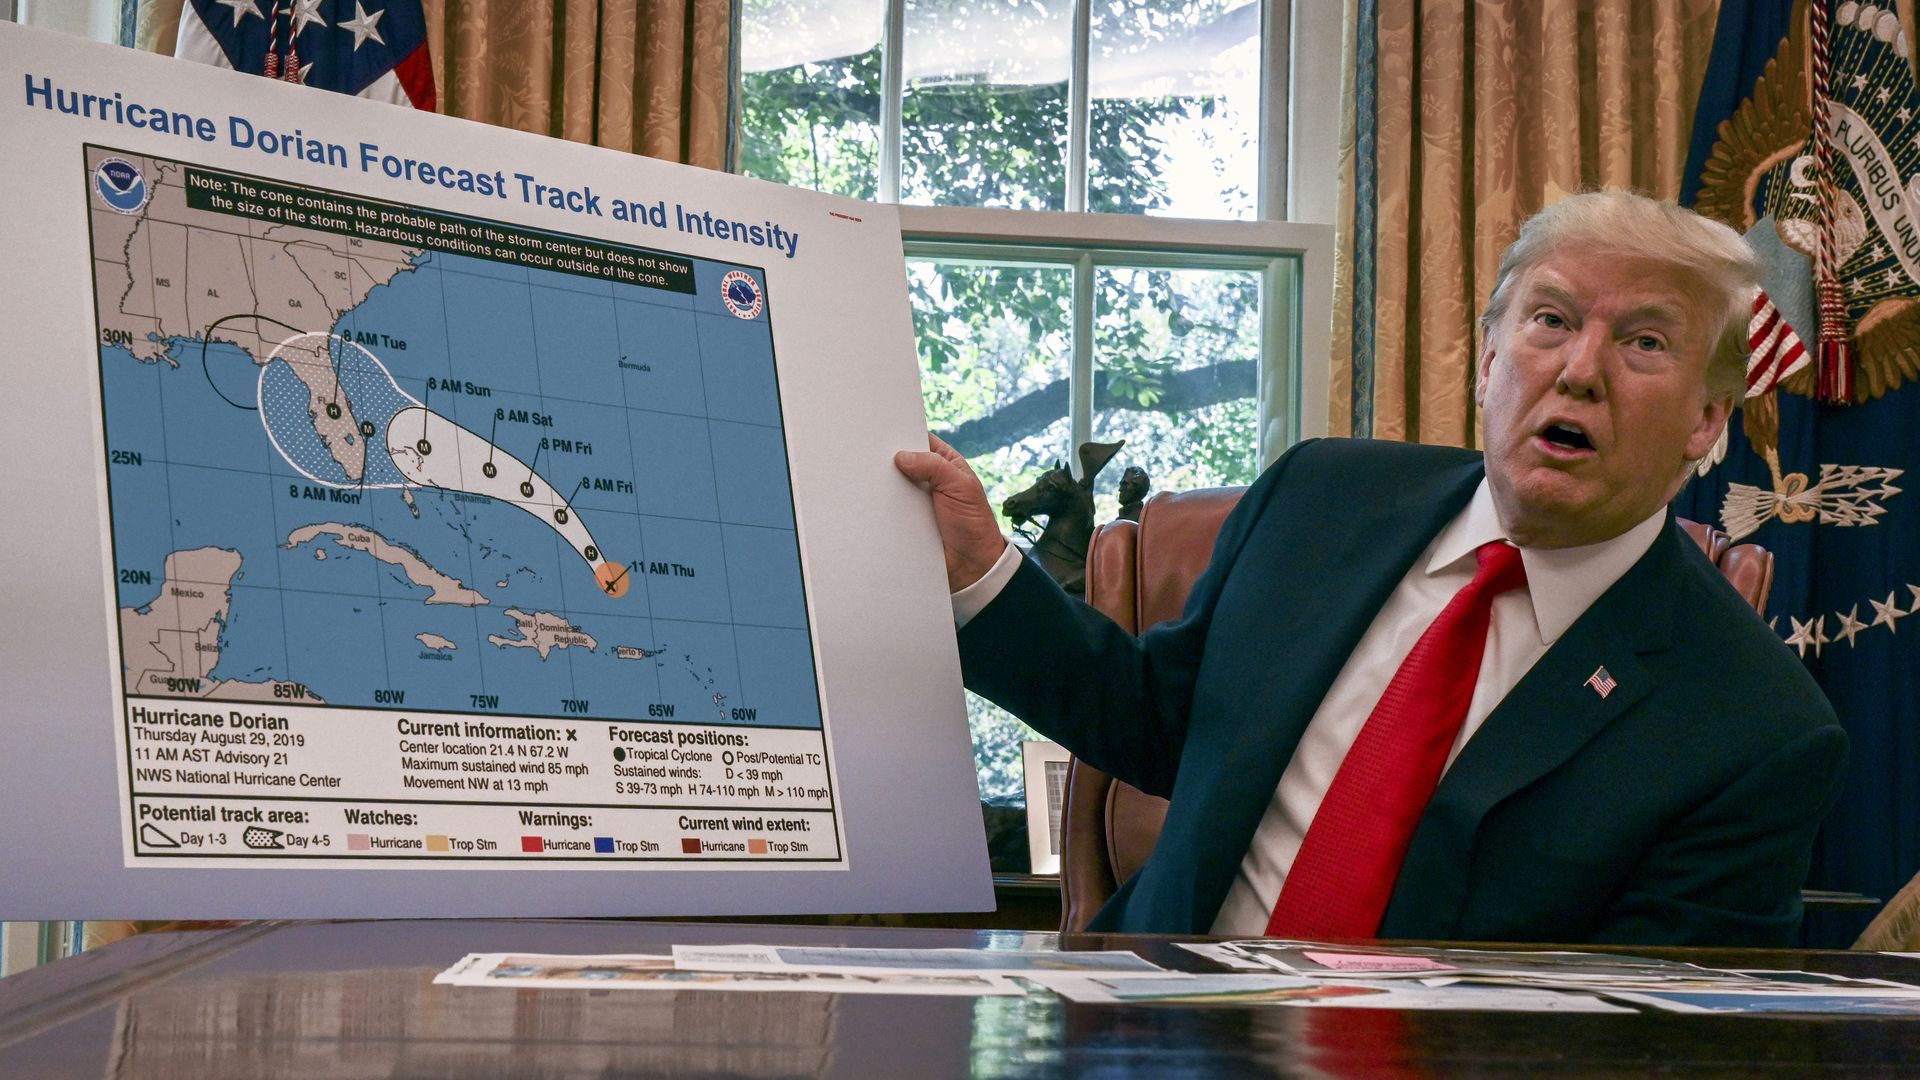 President Trump during a briefing on the status of Hurricane Dorian in September 2019.